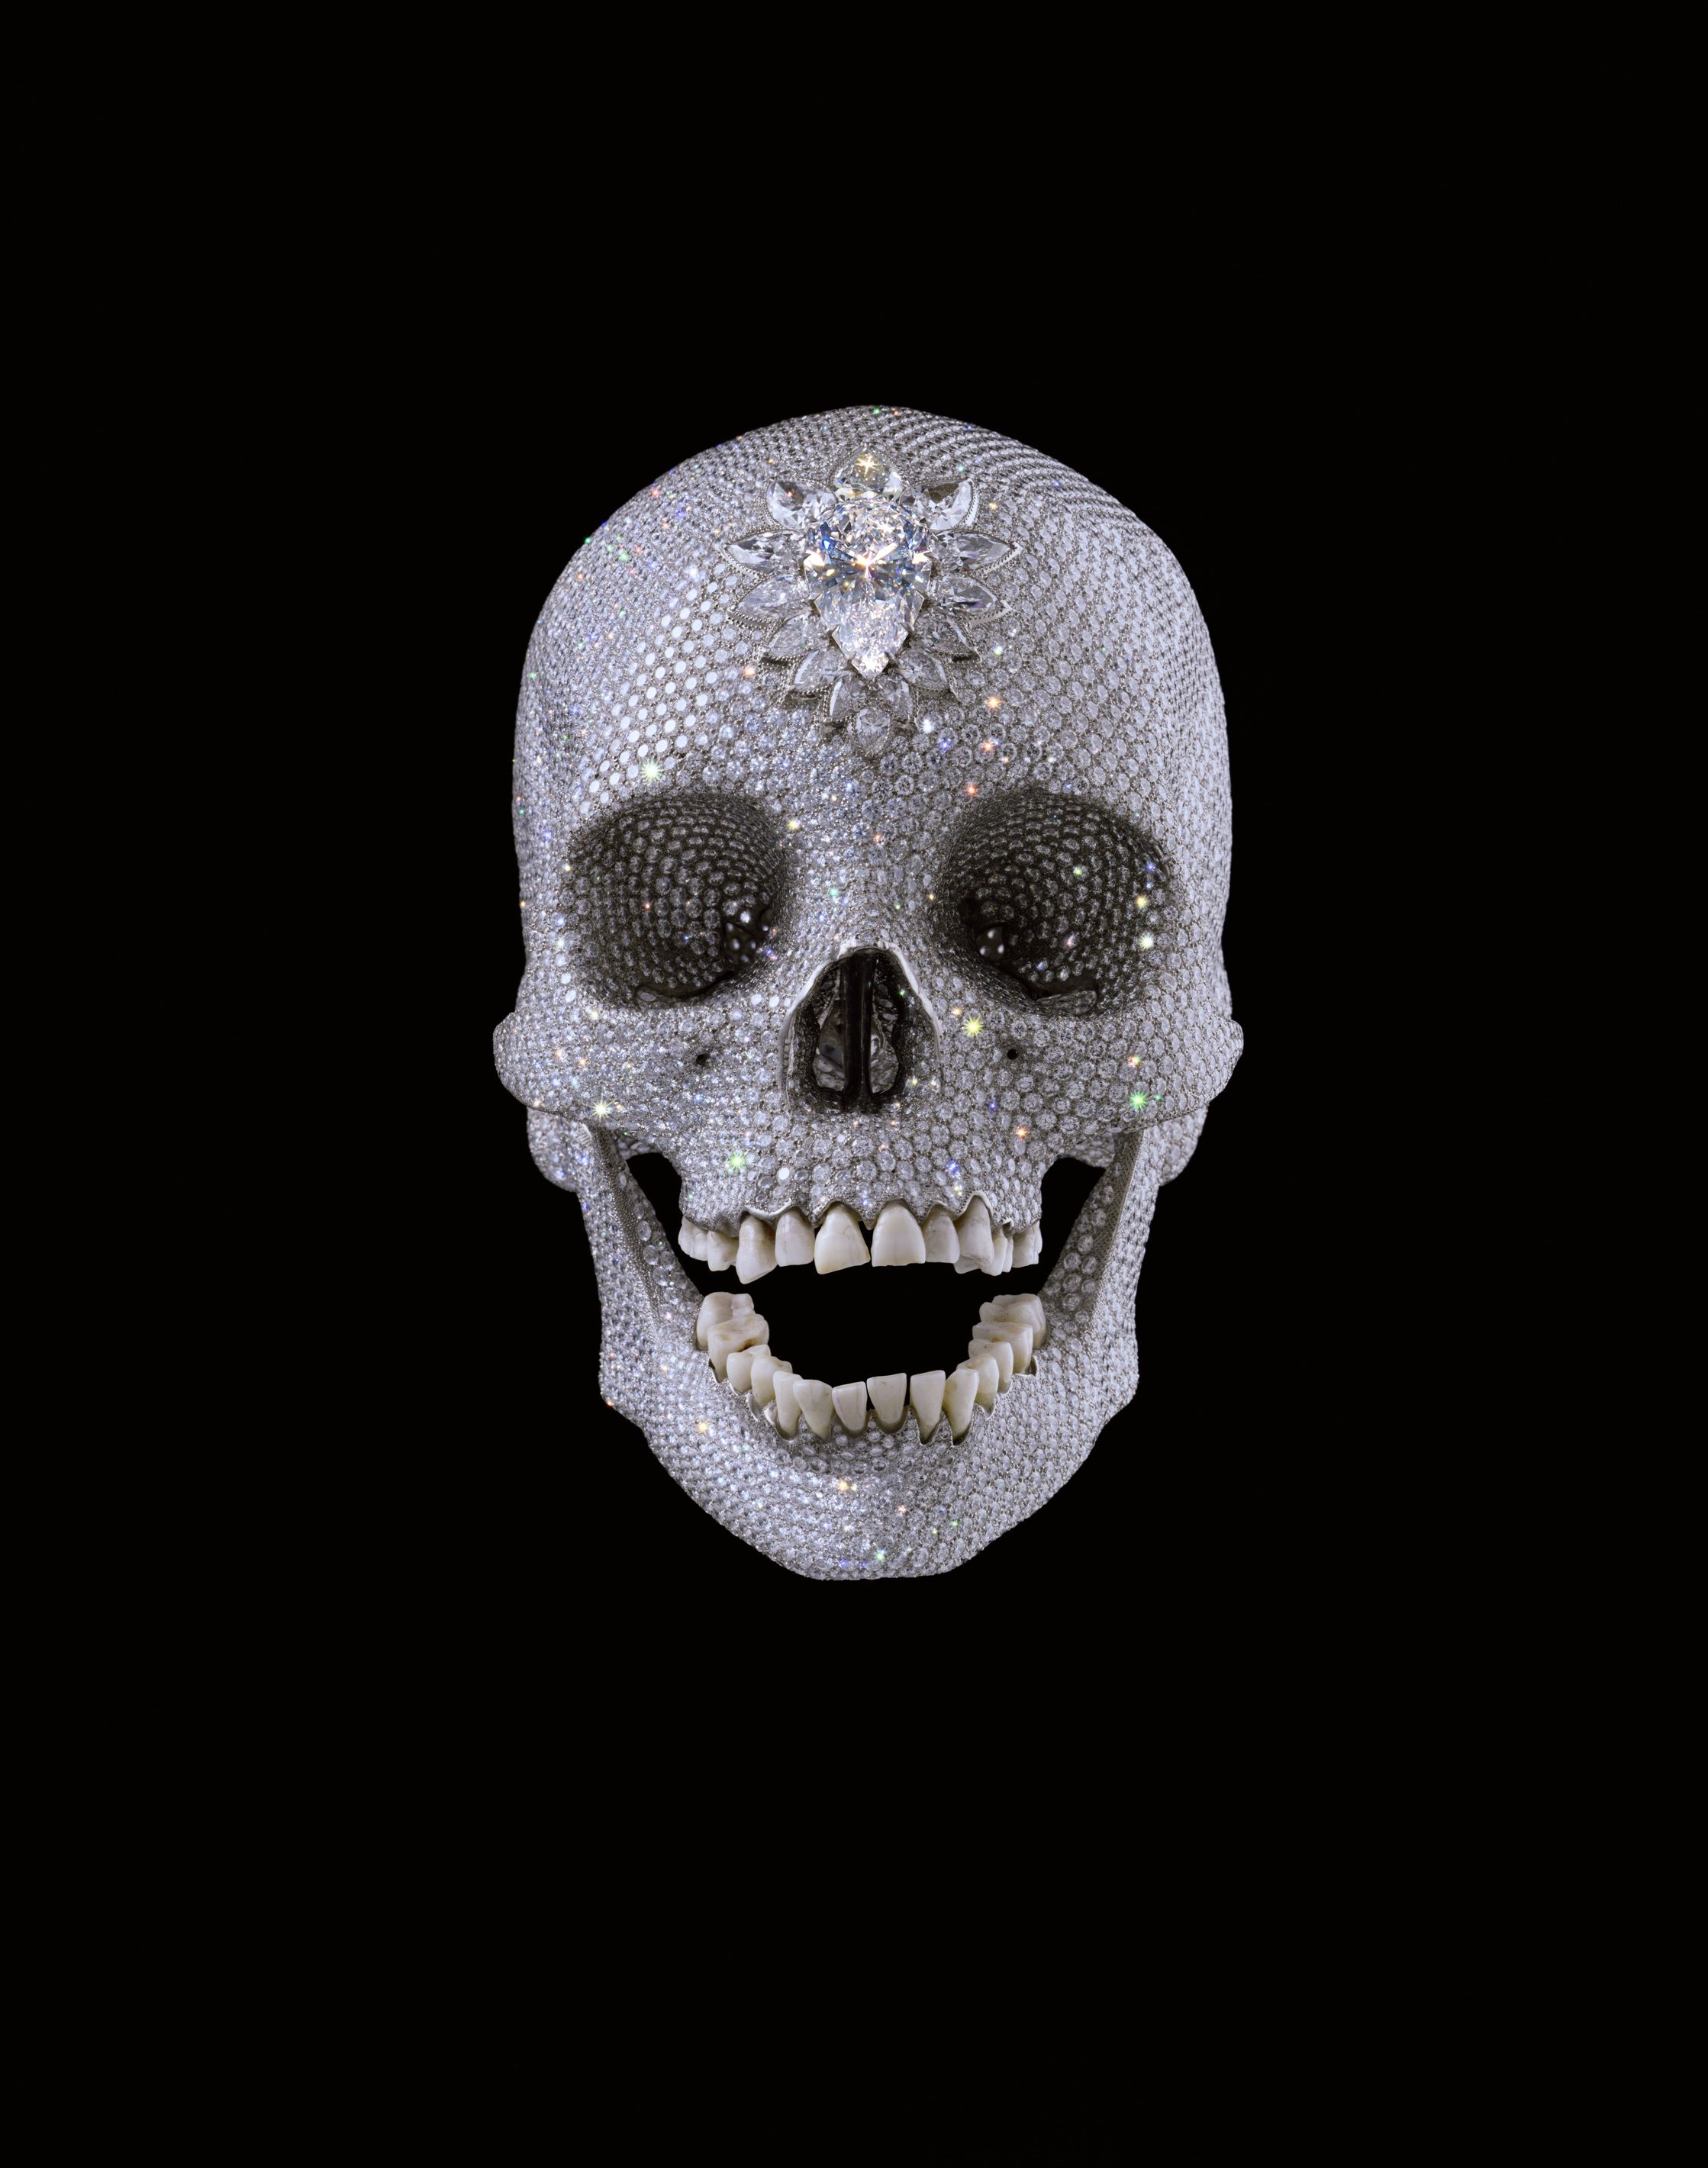 Sculpture made from a cast of a human skull covered in diamonds by artist Damien Hirst.